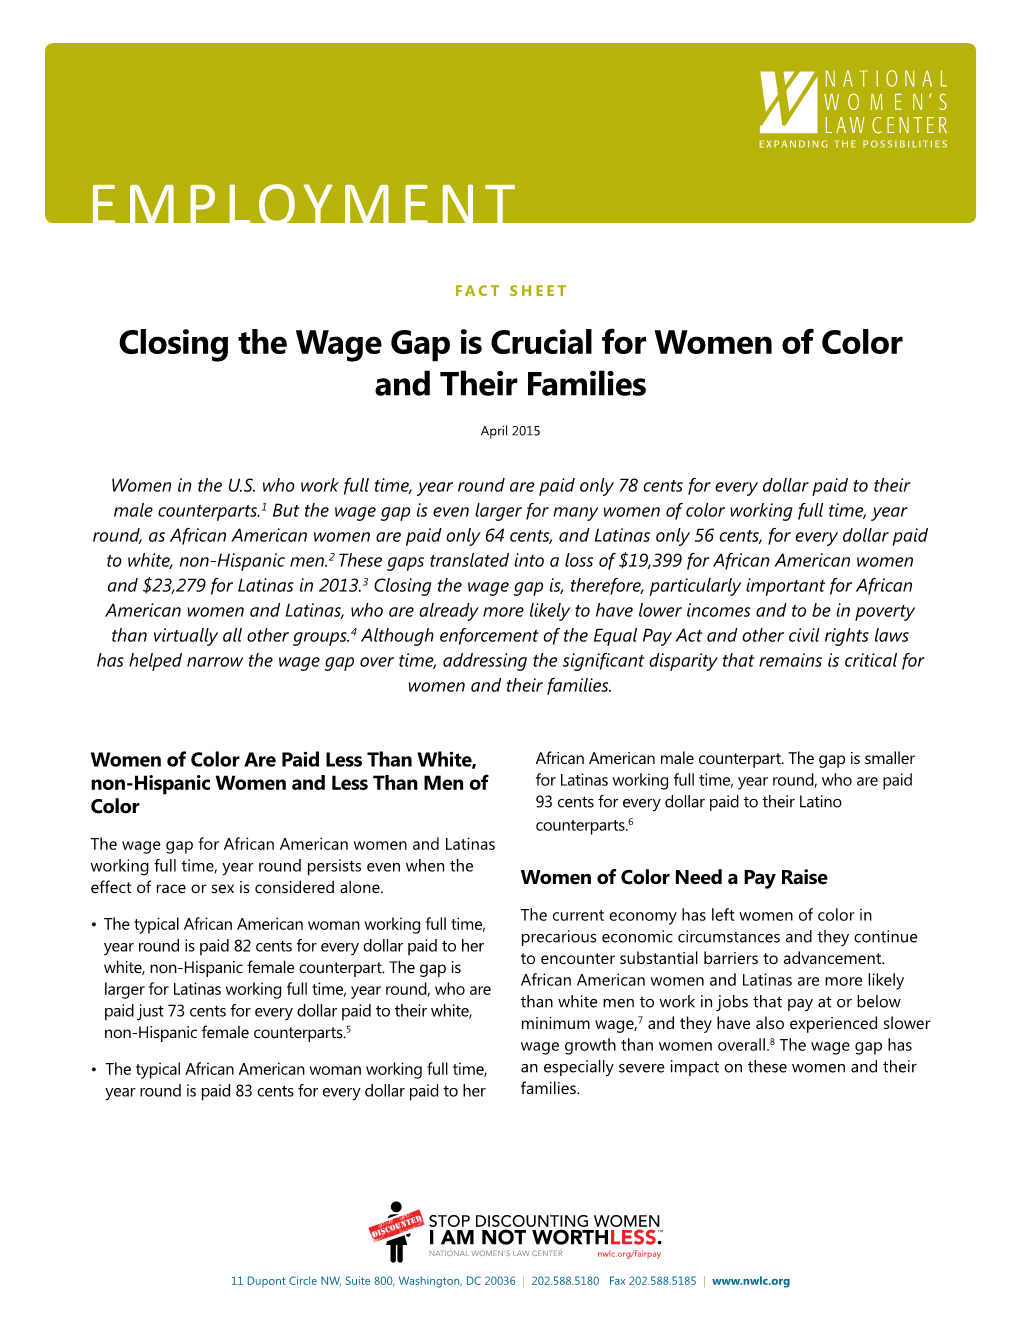 Closing the Wage Gap Is Crucial for Women of Color and Their Families